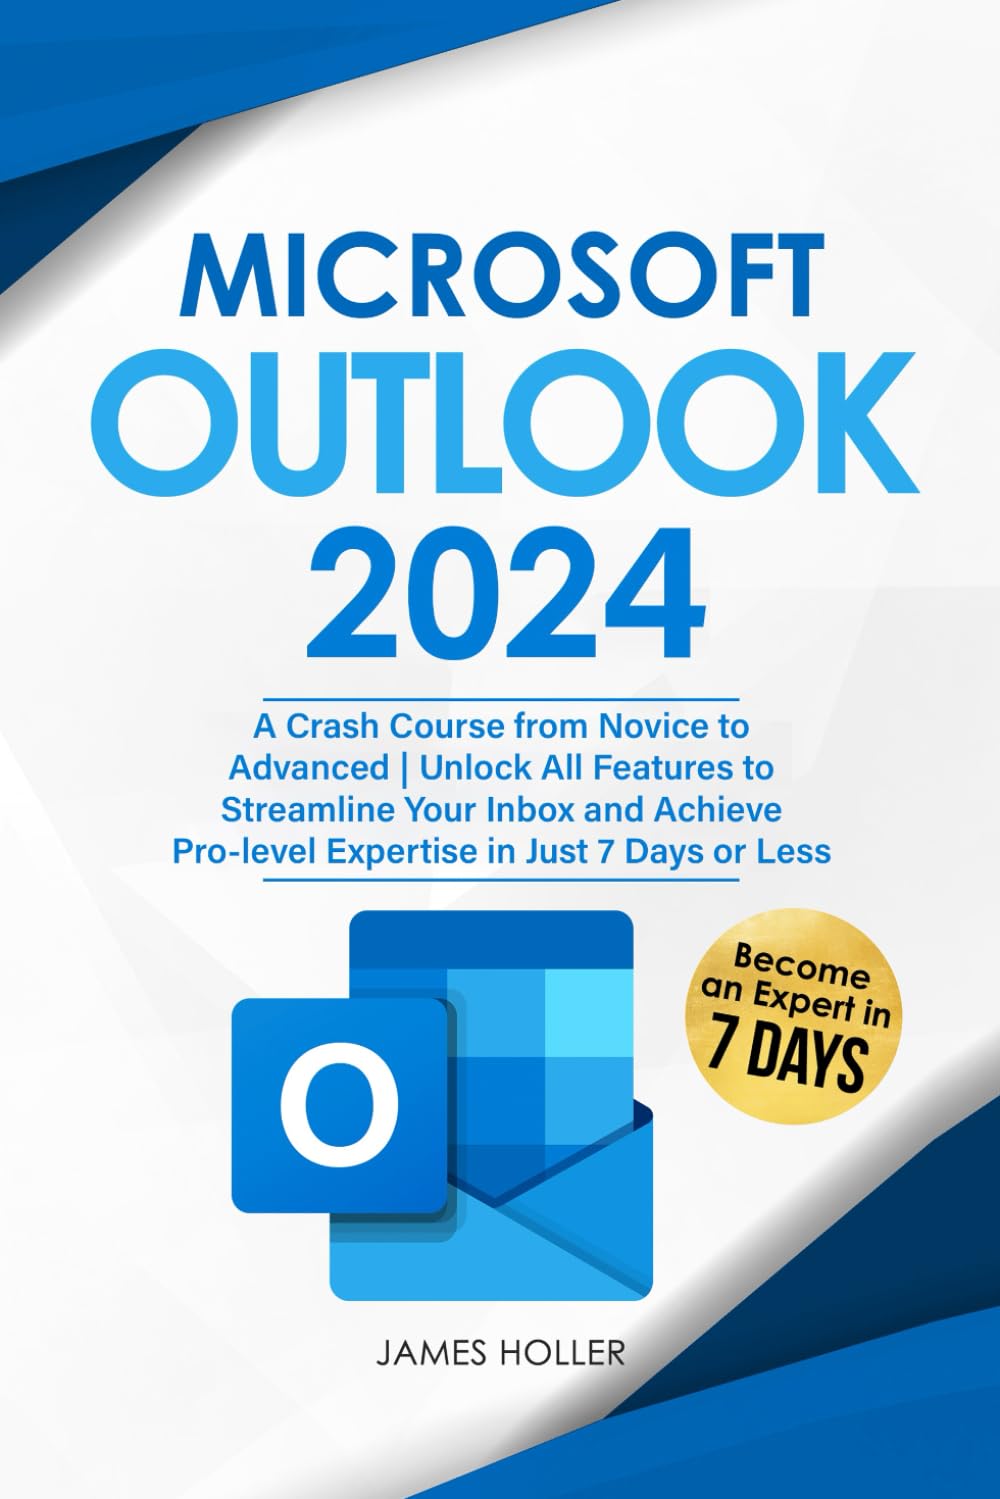 Microsoft Outlook: A Crash Course from Novice to Advanced | Unlock All Features to Streamline Your Inbox and Achieve Pro-level Expertise in Just 7 Days or Less